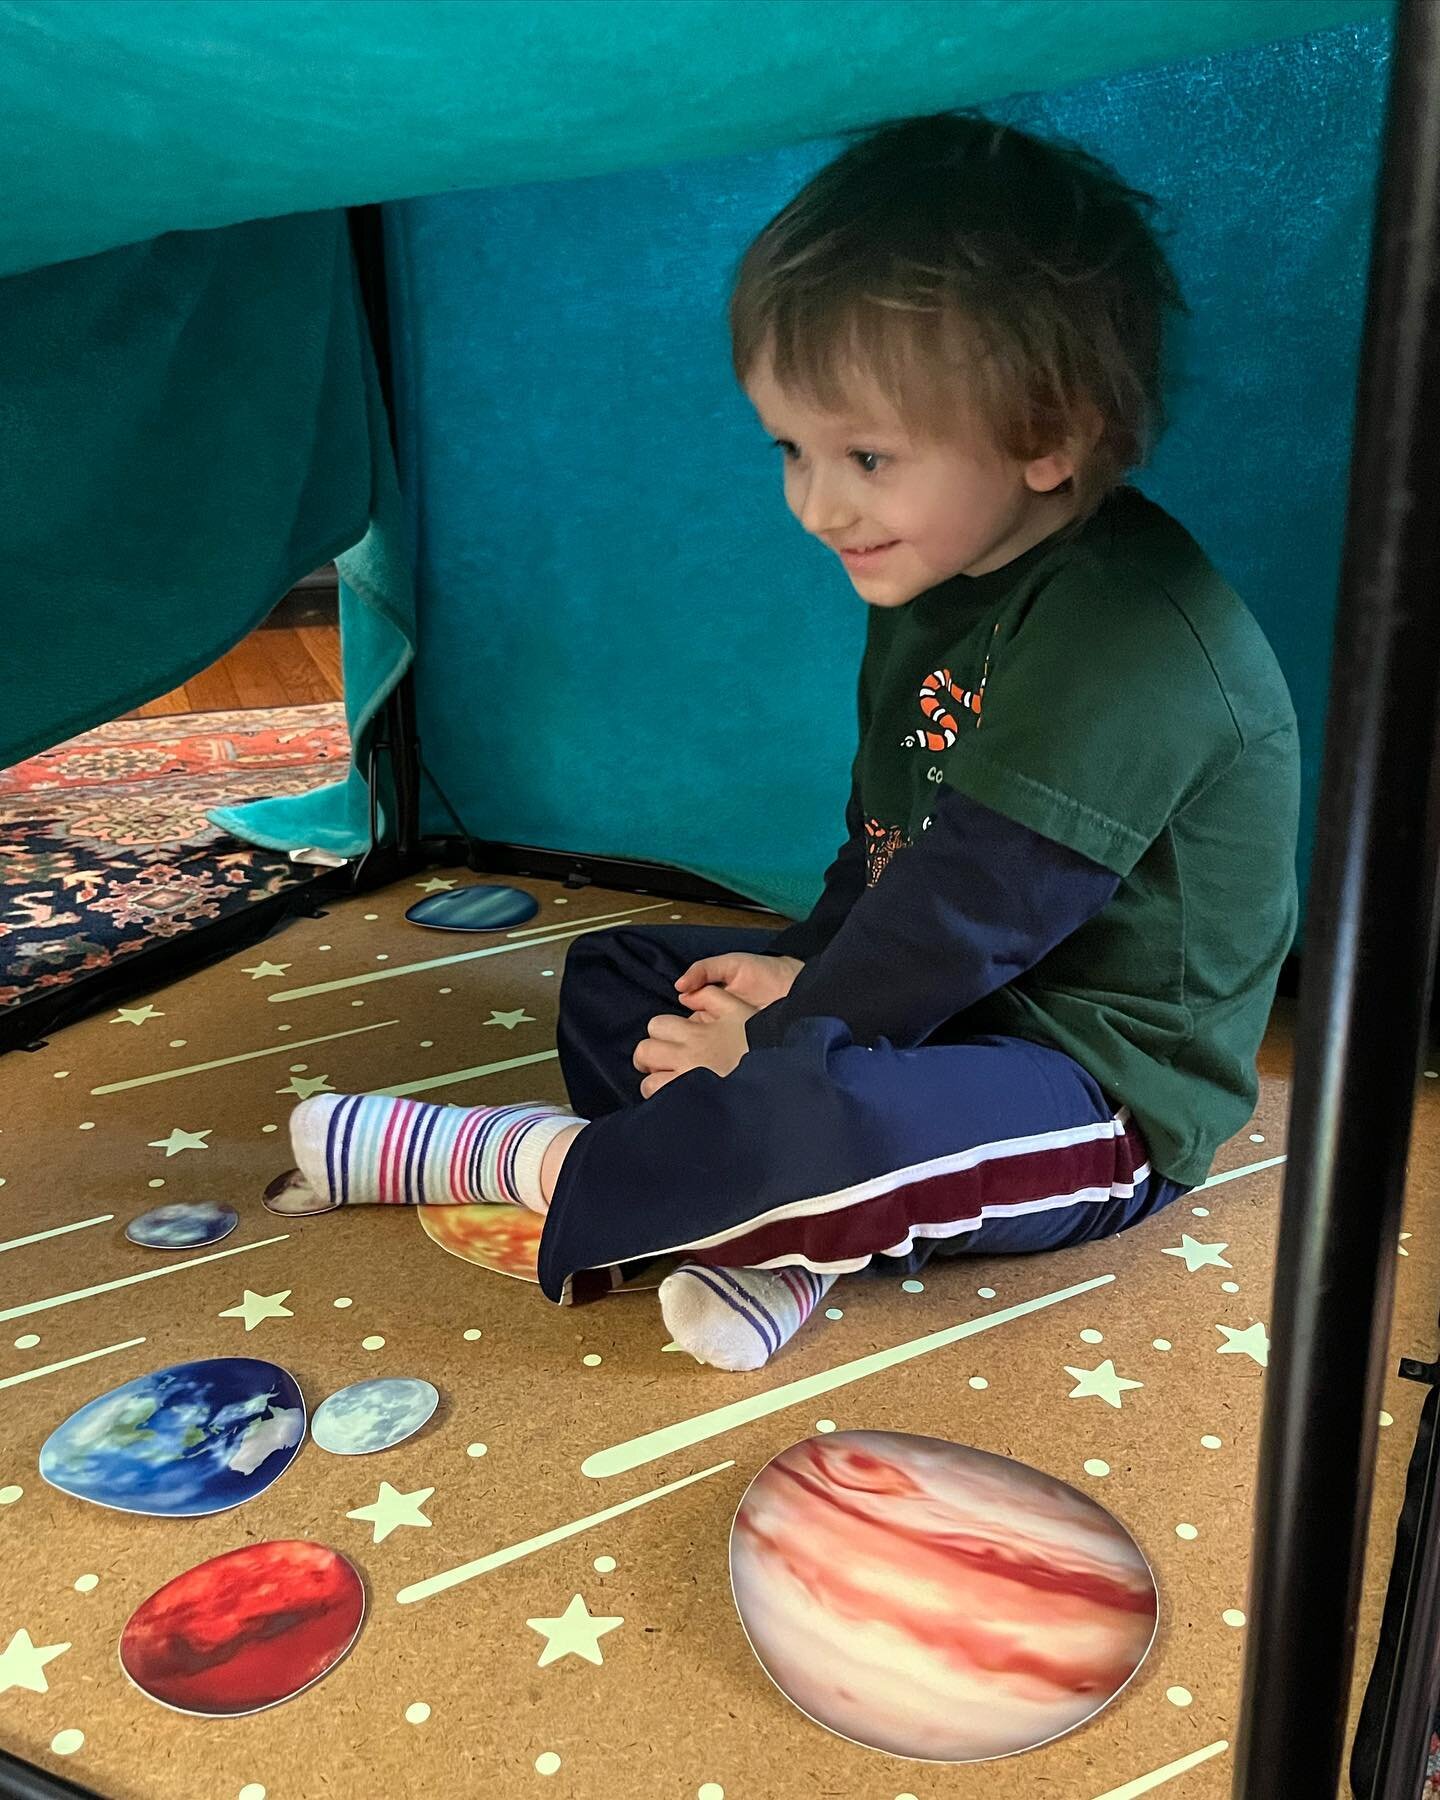 Speech therapy took place in outer space this morning! How fun! 💚
-
-
-
-
#speechtherapy #earlyintervention #earlyinterventionspeech #slp #outerspace